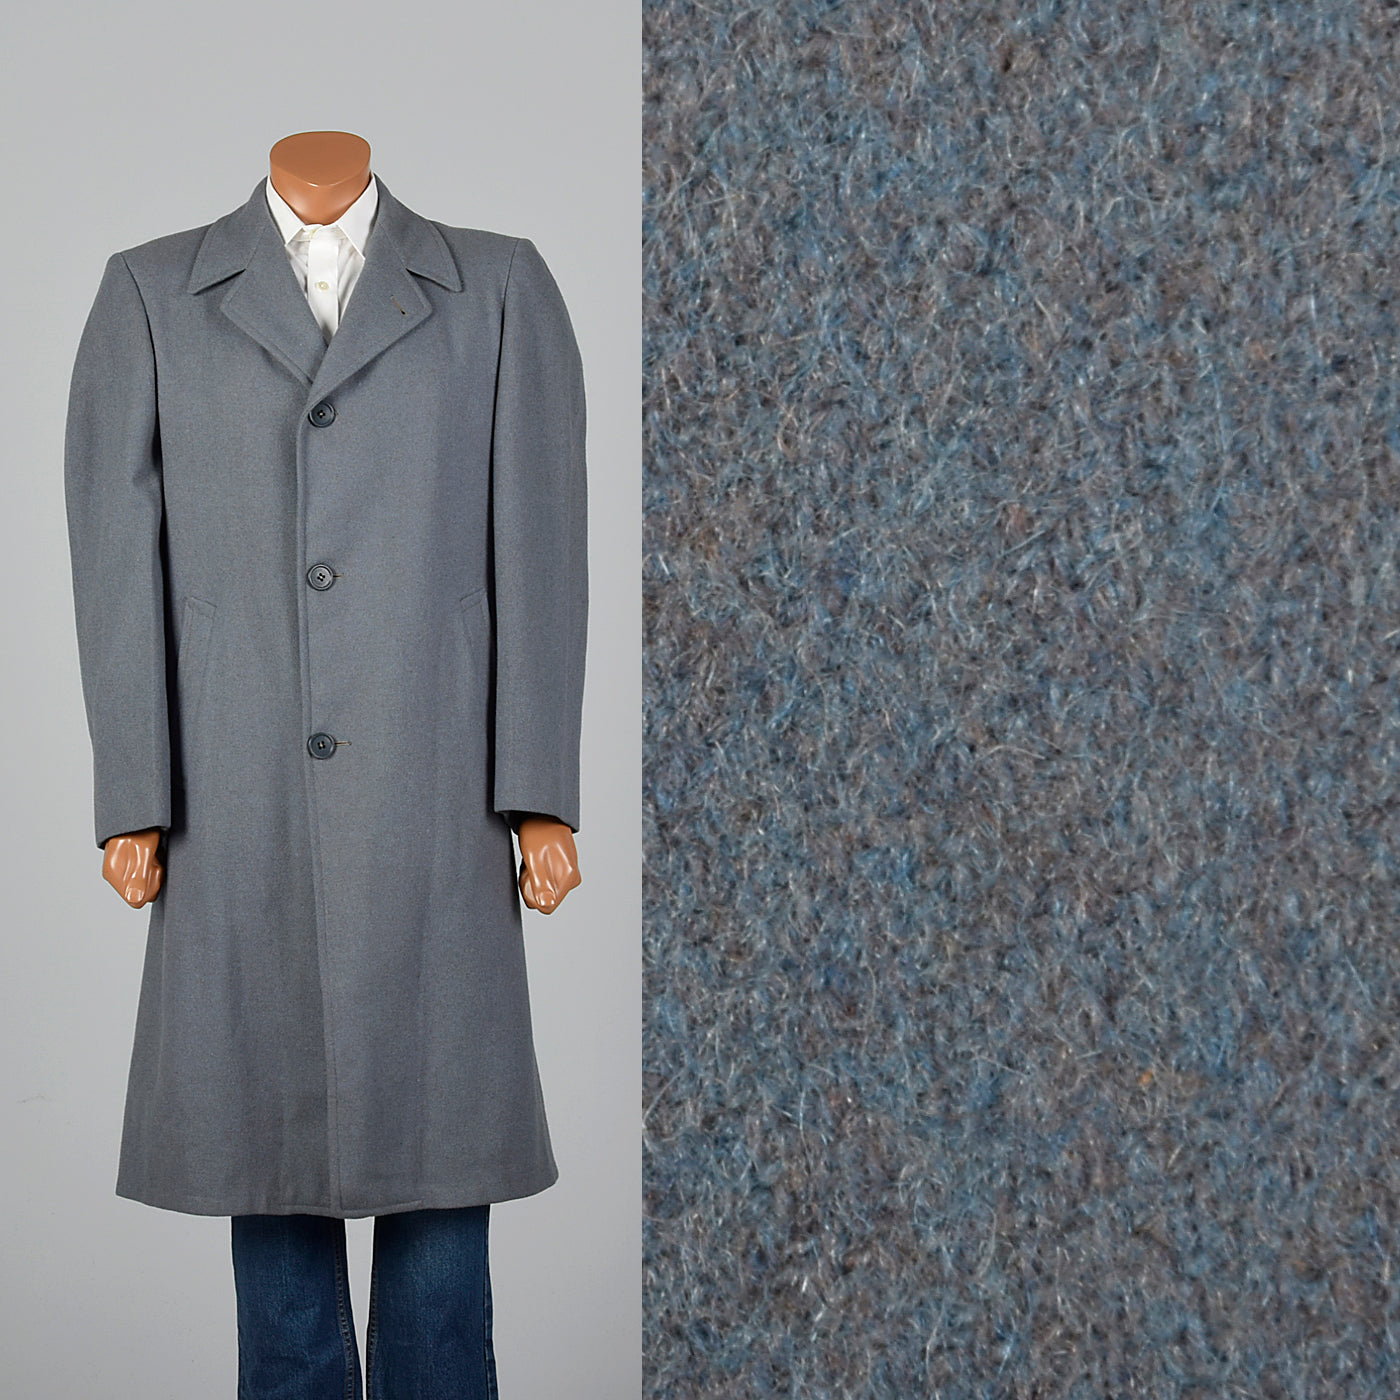 1950s Mens Gray and Blue Overcoat